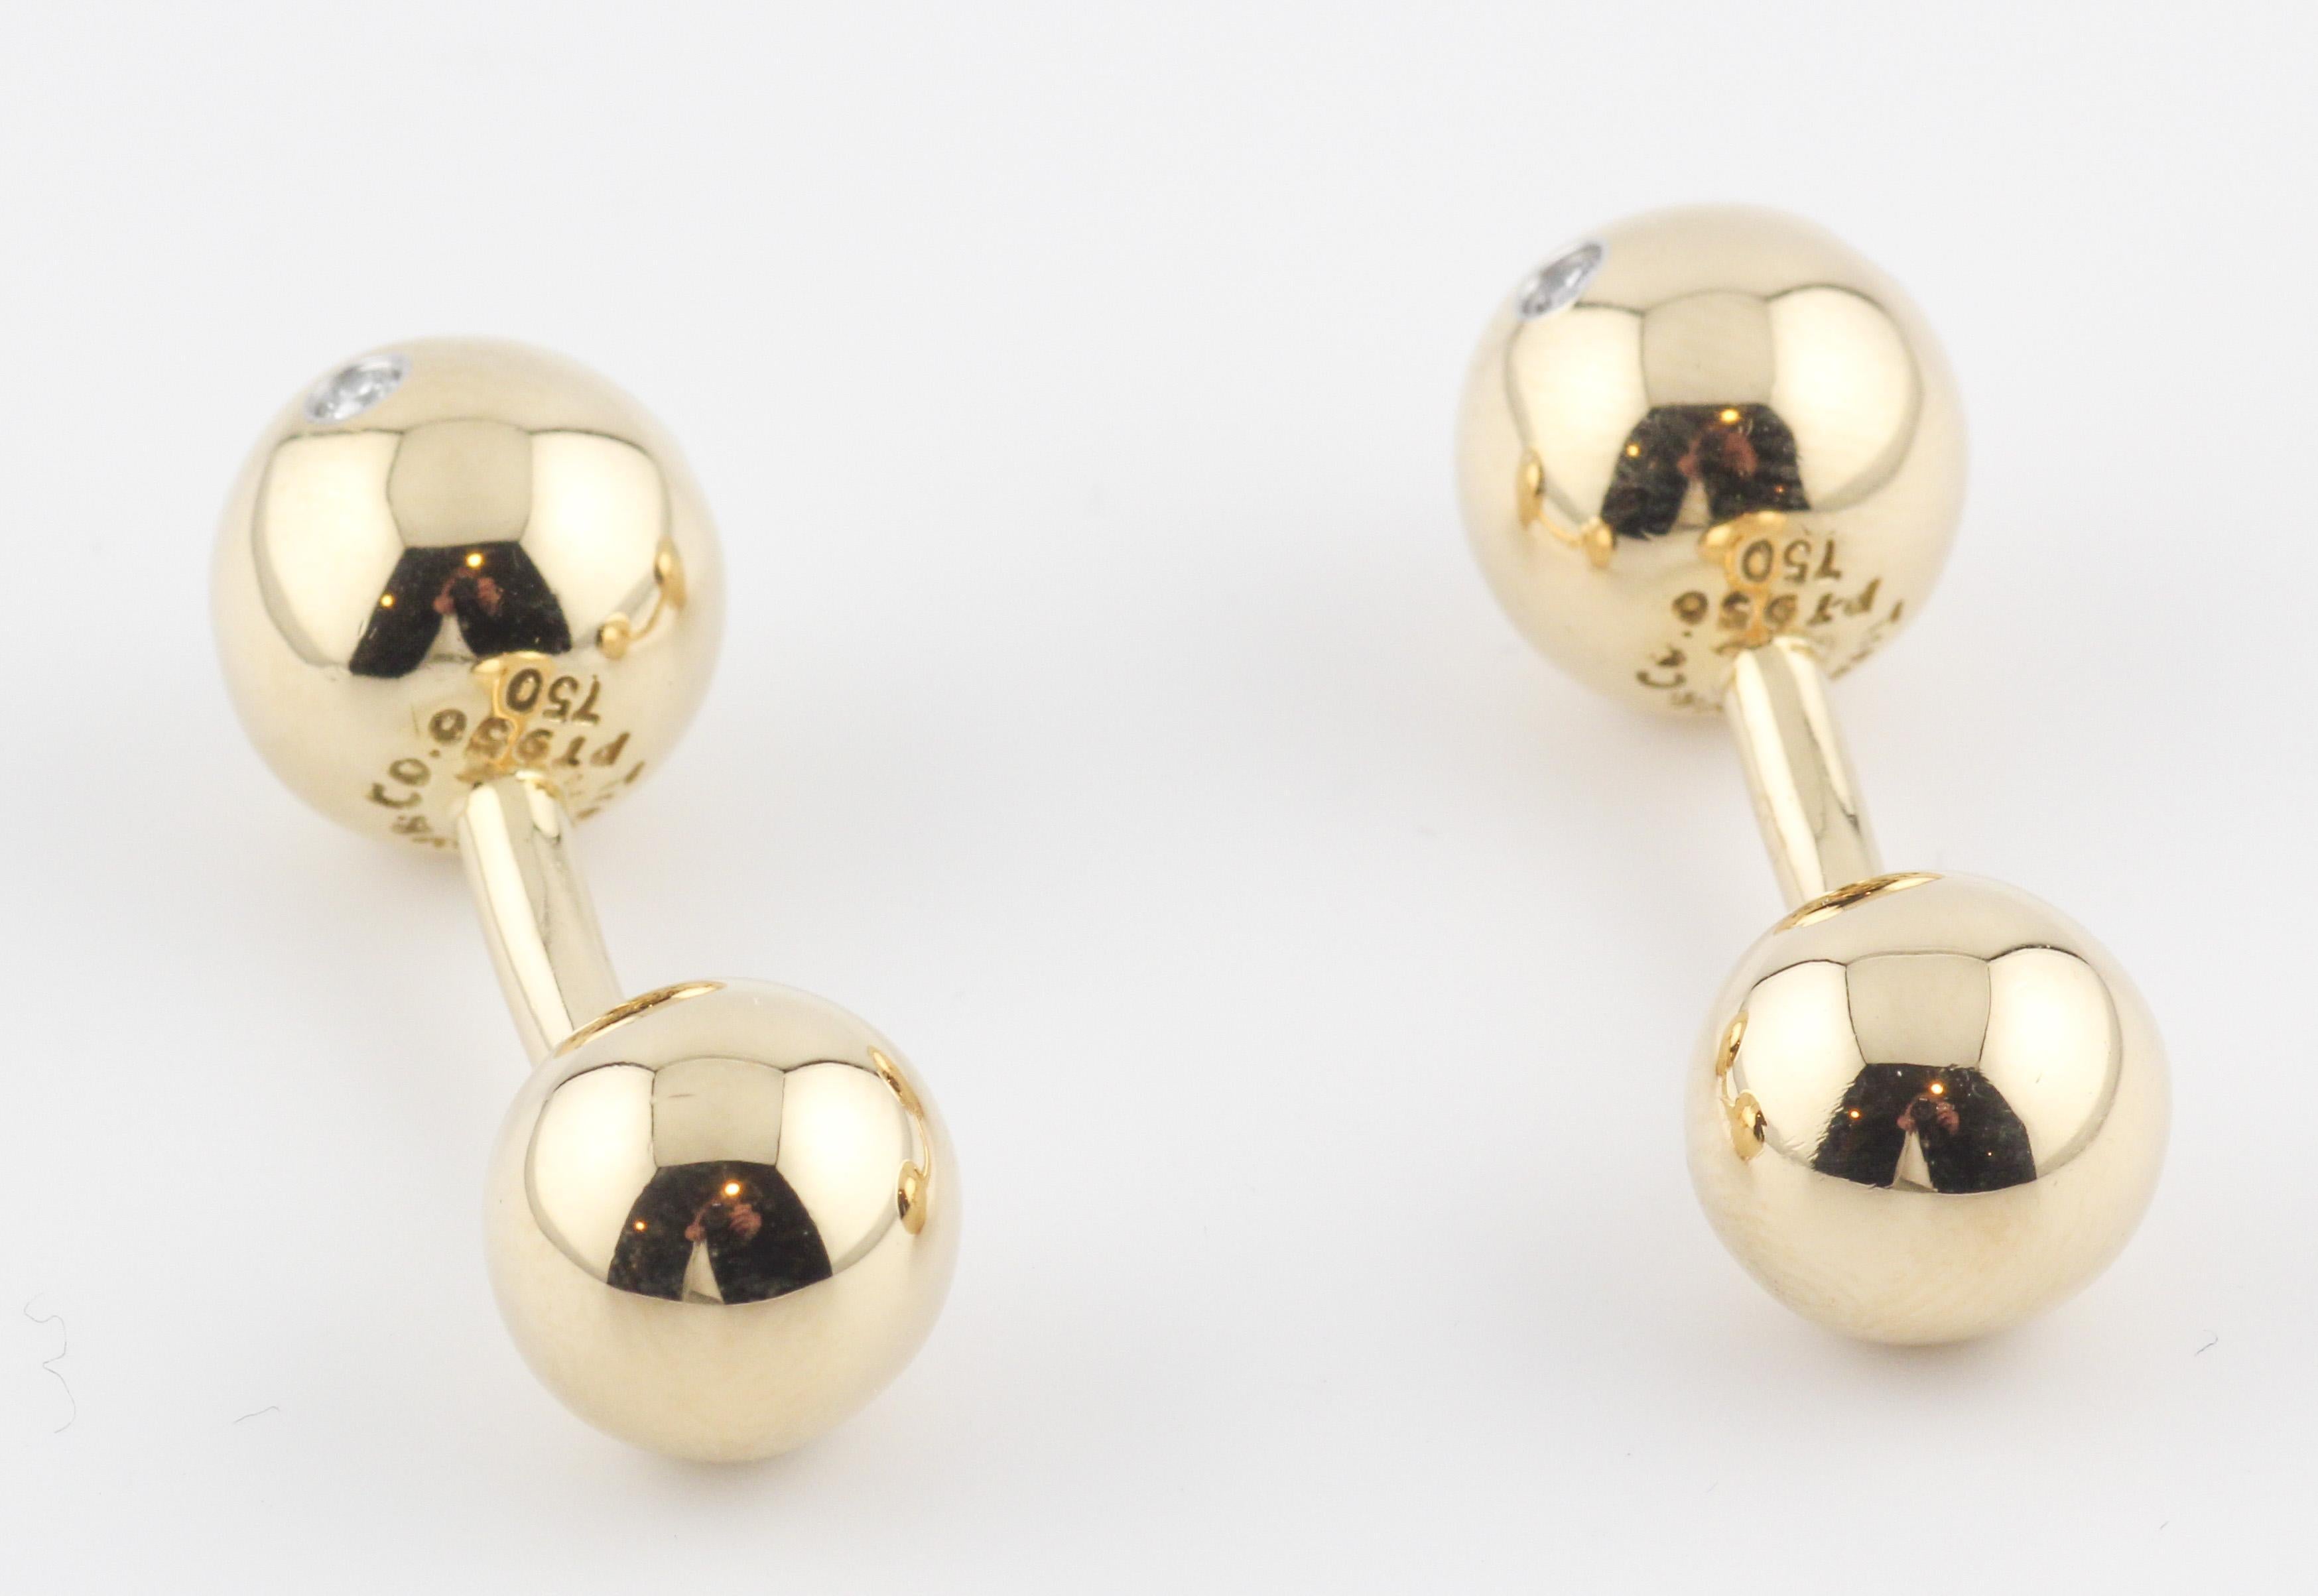 Step into a world of refined elegance with these Tiffany & Co. Etoile Diamond 18K Gold Platinum Dumbbell Cufflinks. Melding the iconic craftsmanship of Tiffany & Co. with a sophisticated design, these cufflinks are a testament to the brand's